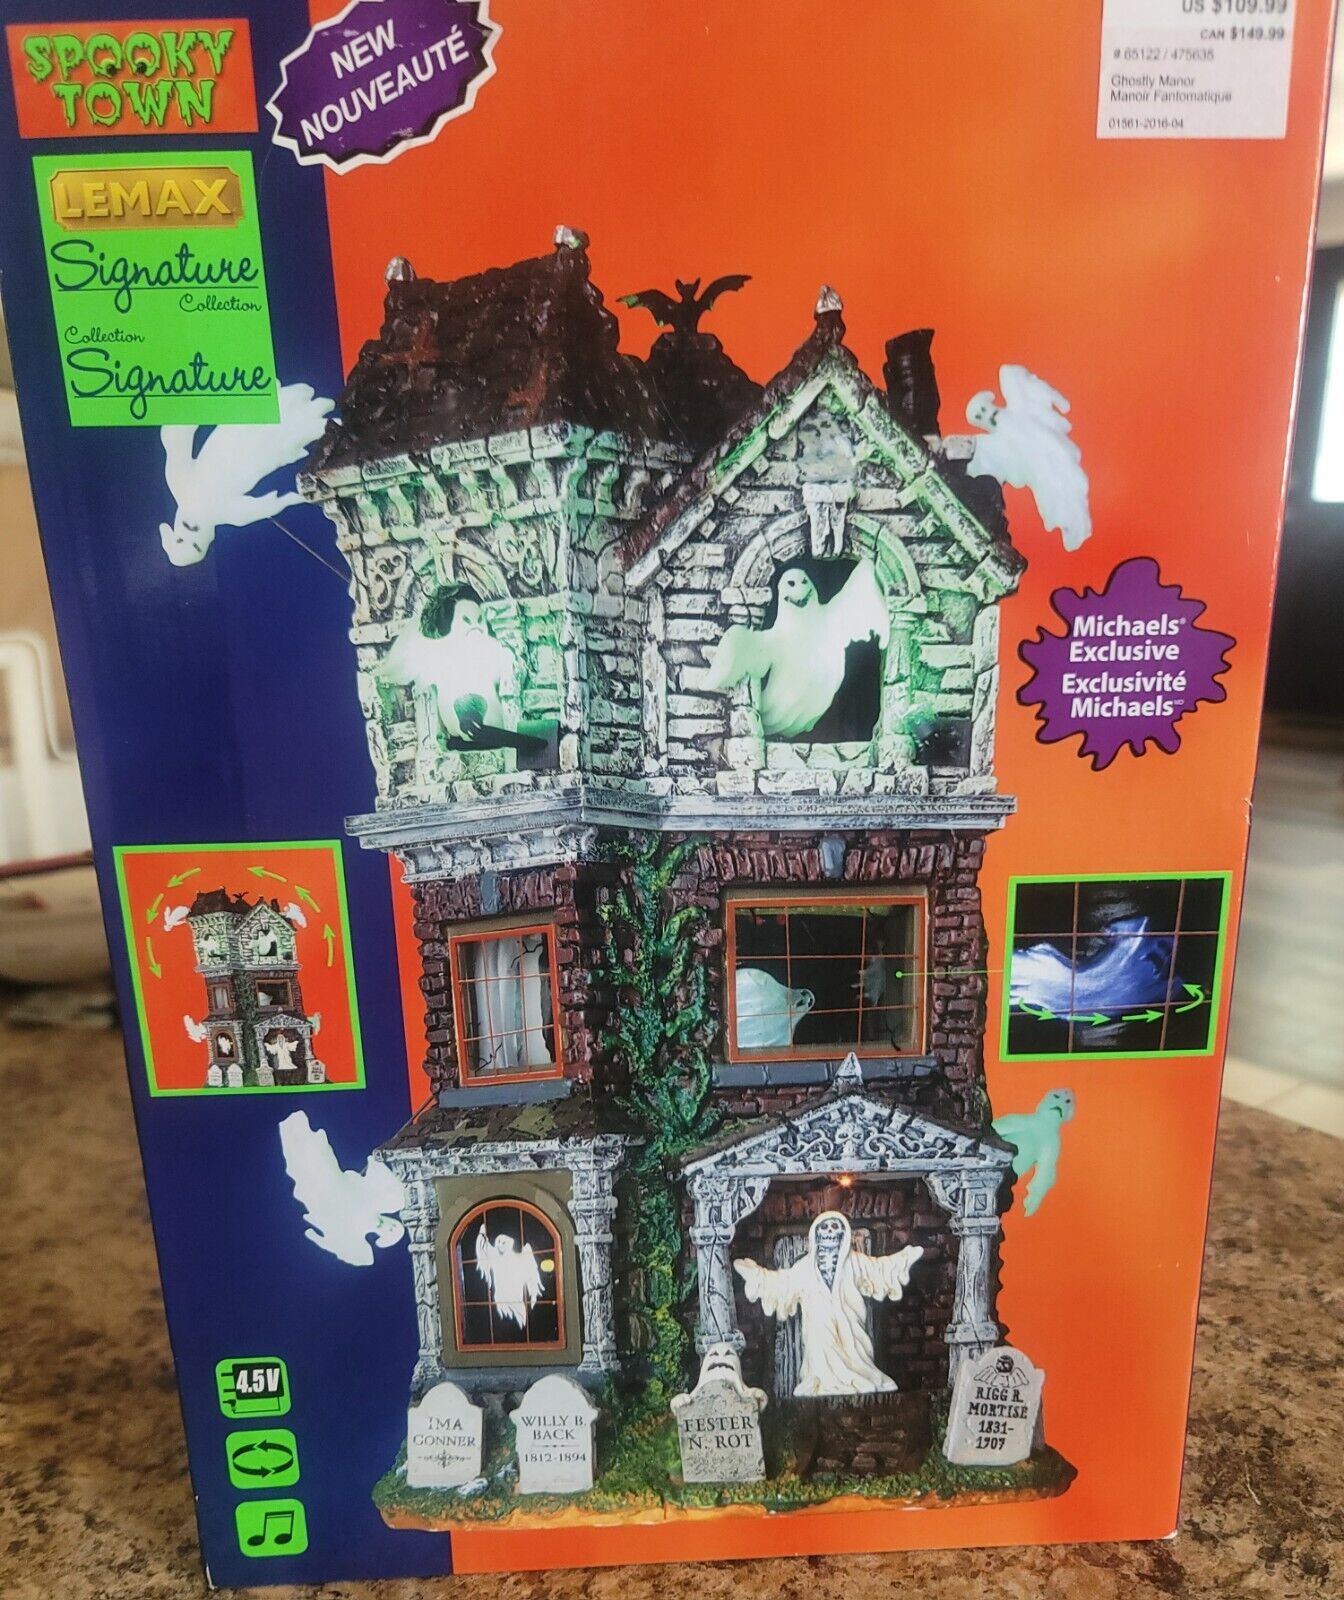 Lemax Spooky Town Village GHOSTLY MANOR 2016 Signature Halloween 65112 Retired 